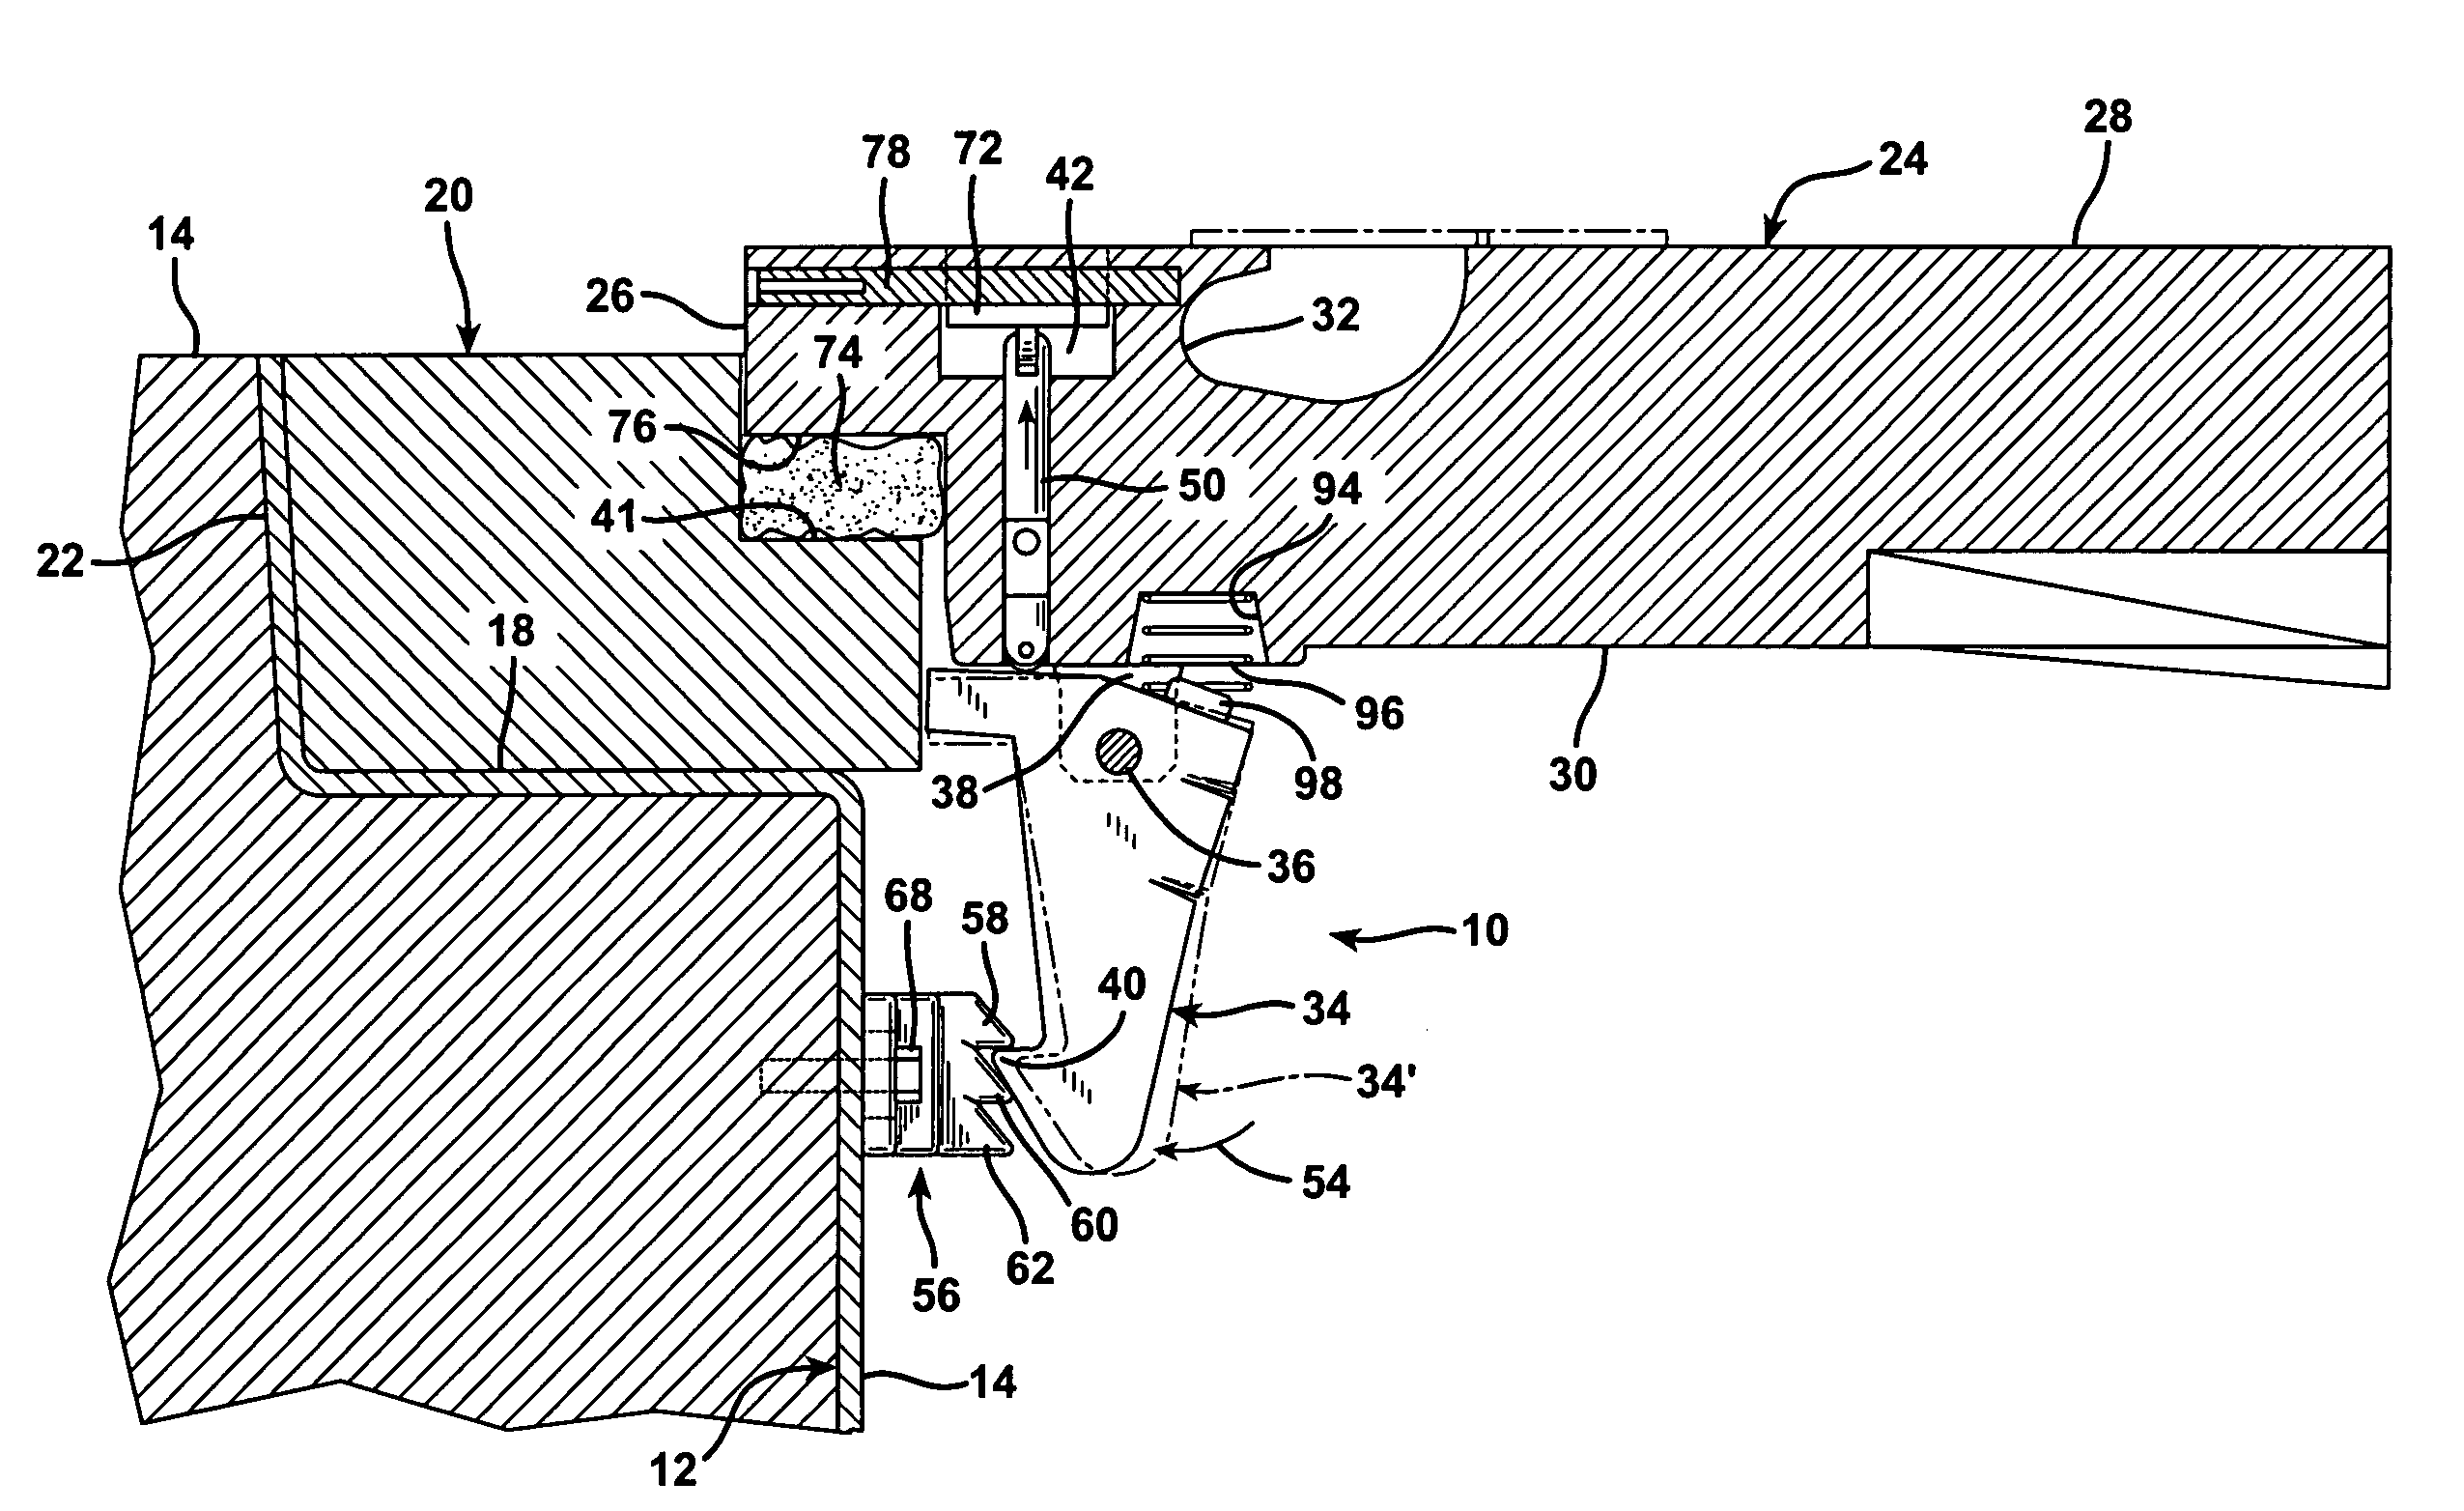 Multi-position aircraft servicing pit lid latch